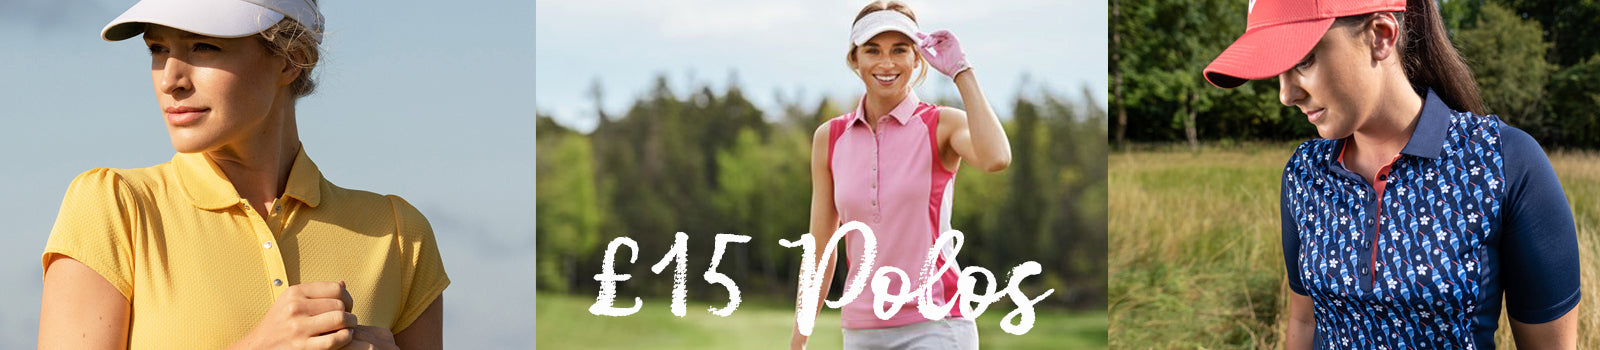 Women's golf polos for only £15 at GolfGarb